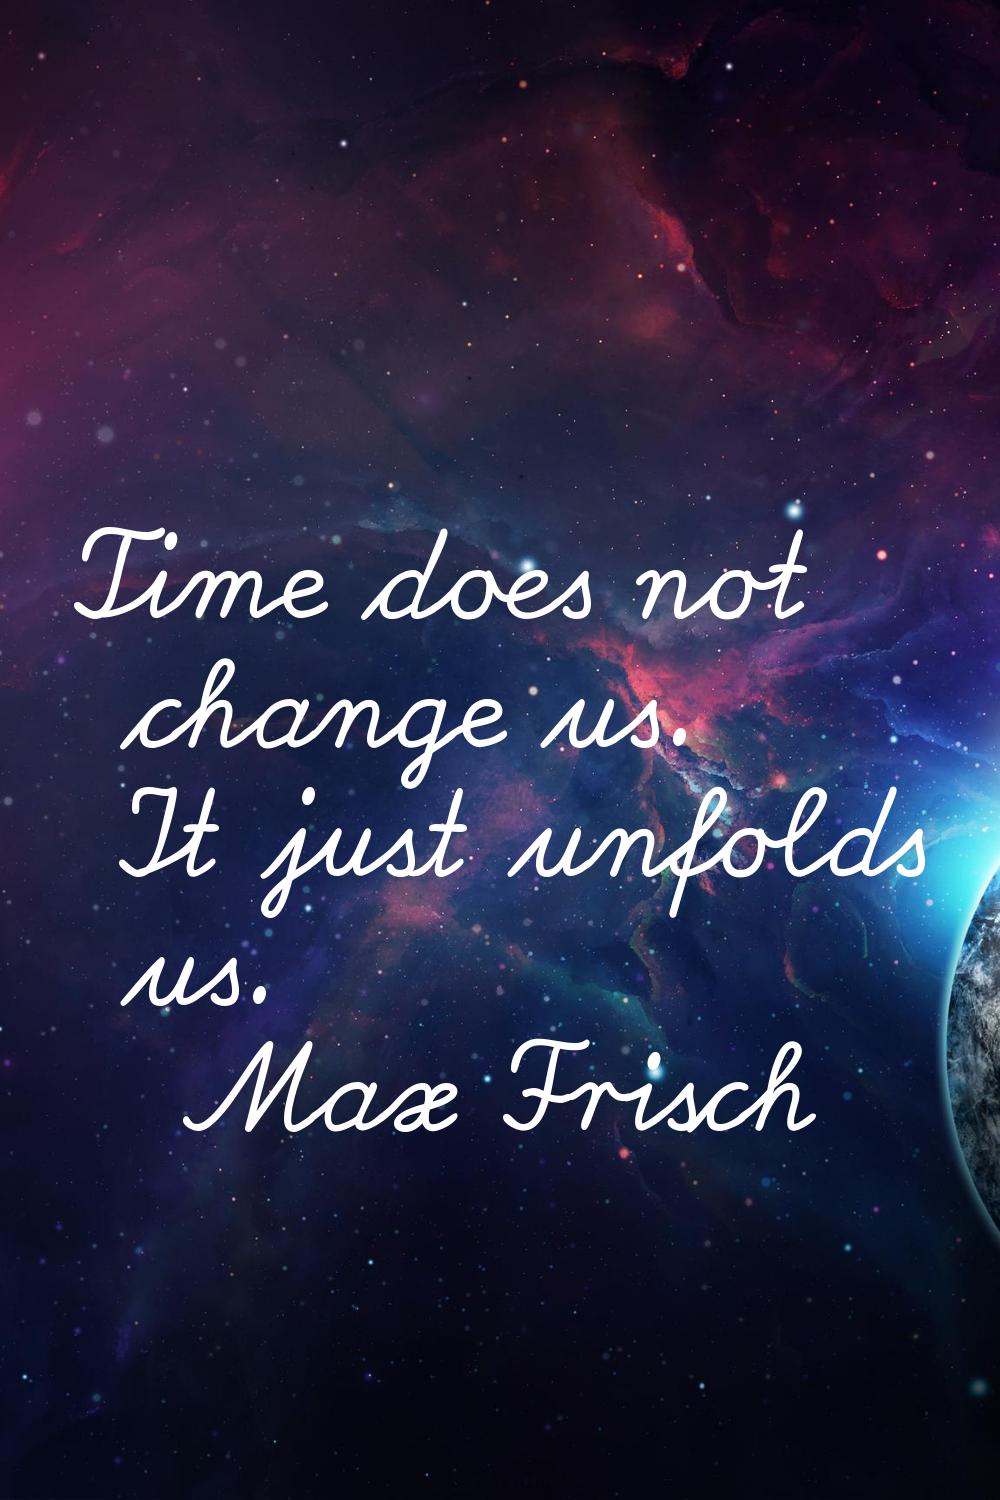 Time does not change us. It just unfolds us.